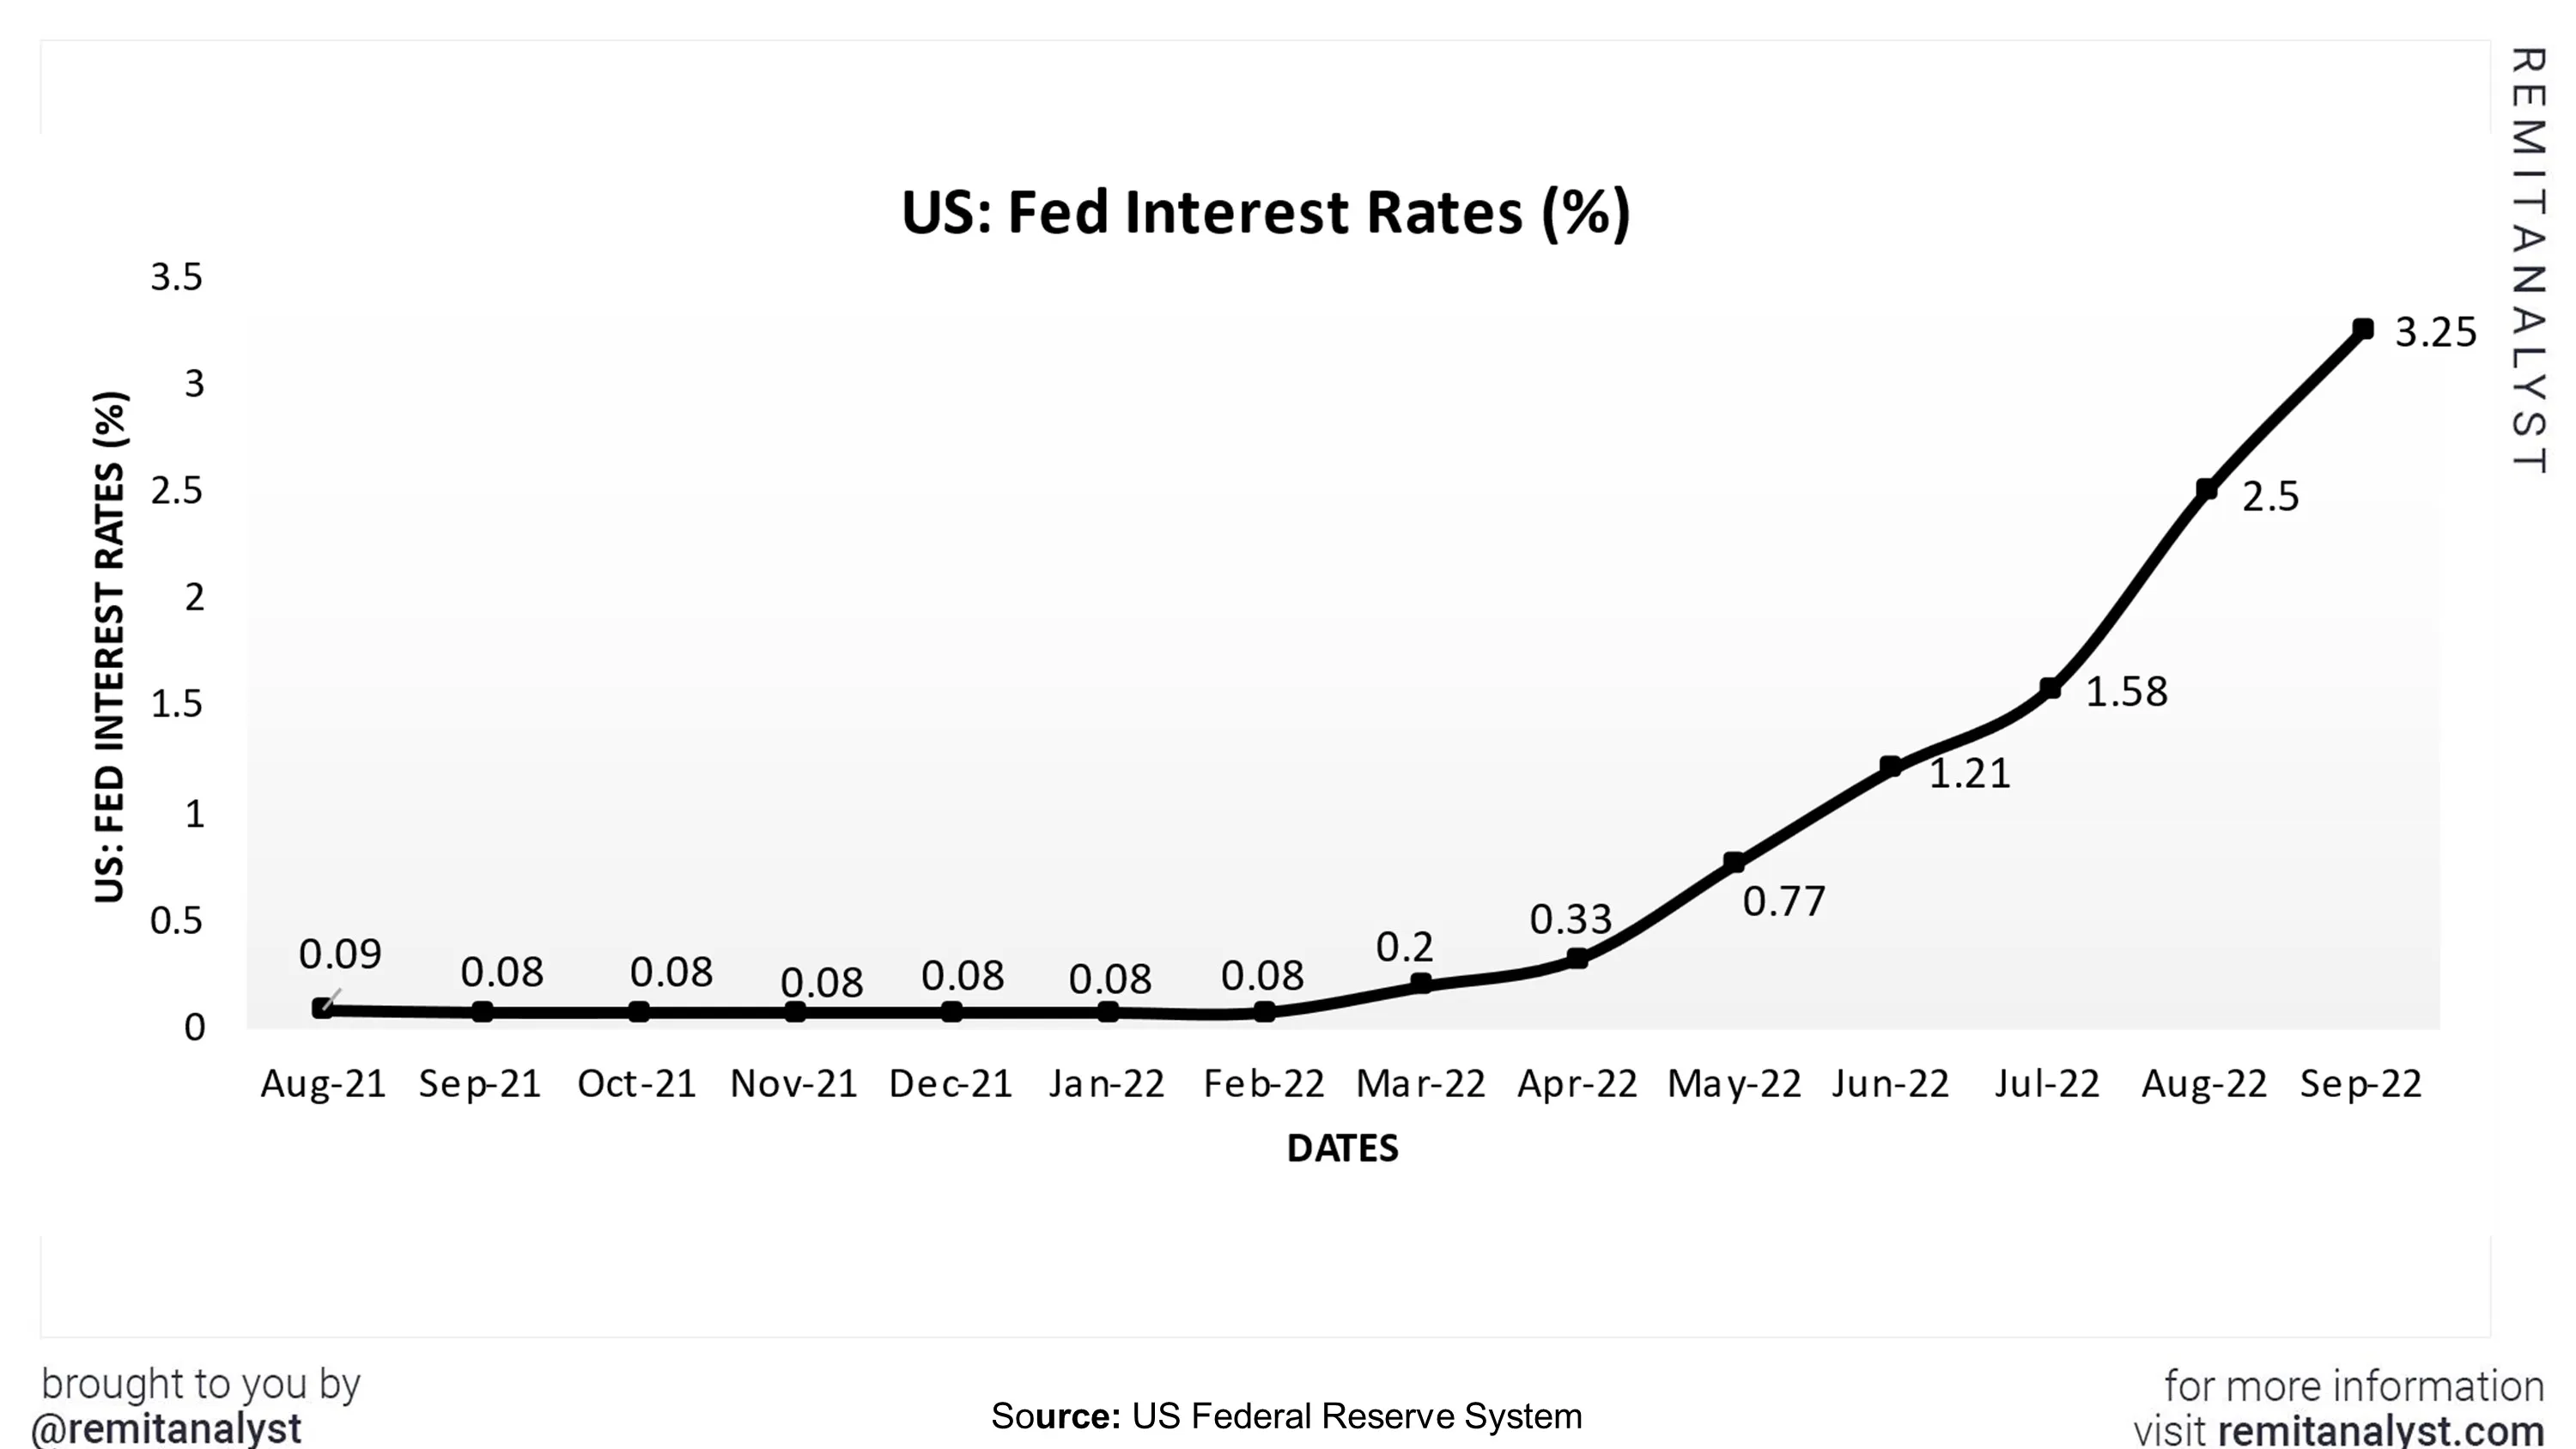 interest-rates-in-us-from-aug-2021-to-sep-2022